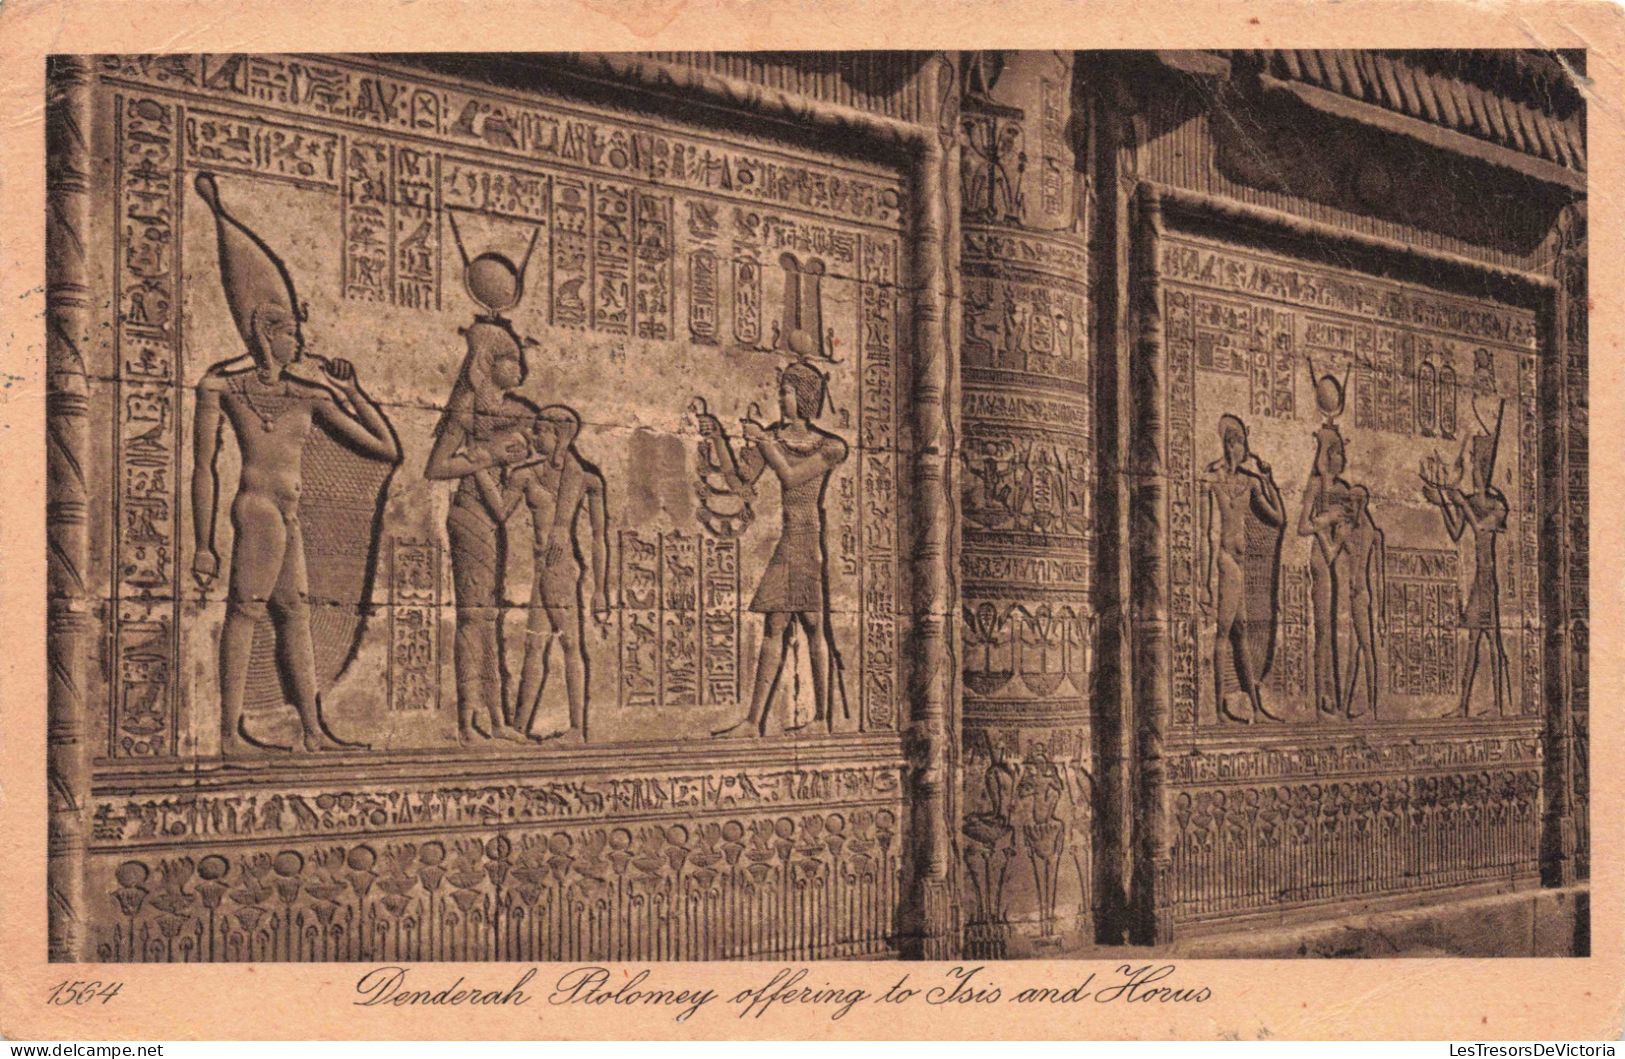 PHOTOGRAPHIE - Denderah Ptolomey Offering To Isis And Horus - Carte Postale Ancienne - Fotografie